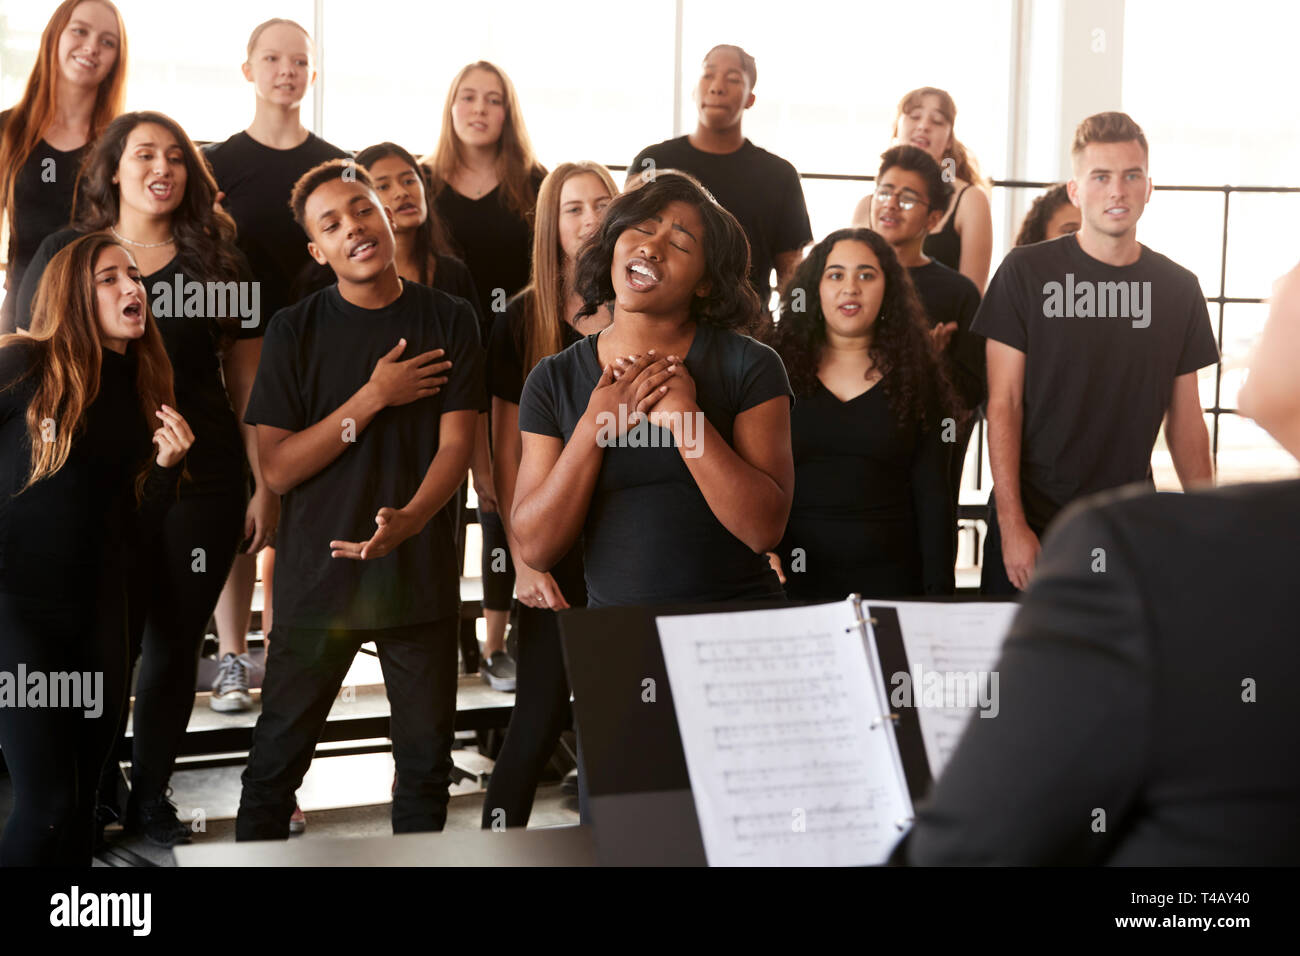 Male And Female Students Singing In Choir With Teacher At Performing Arts School Stock Photo